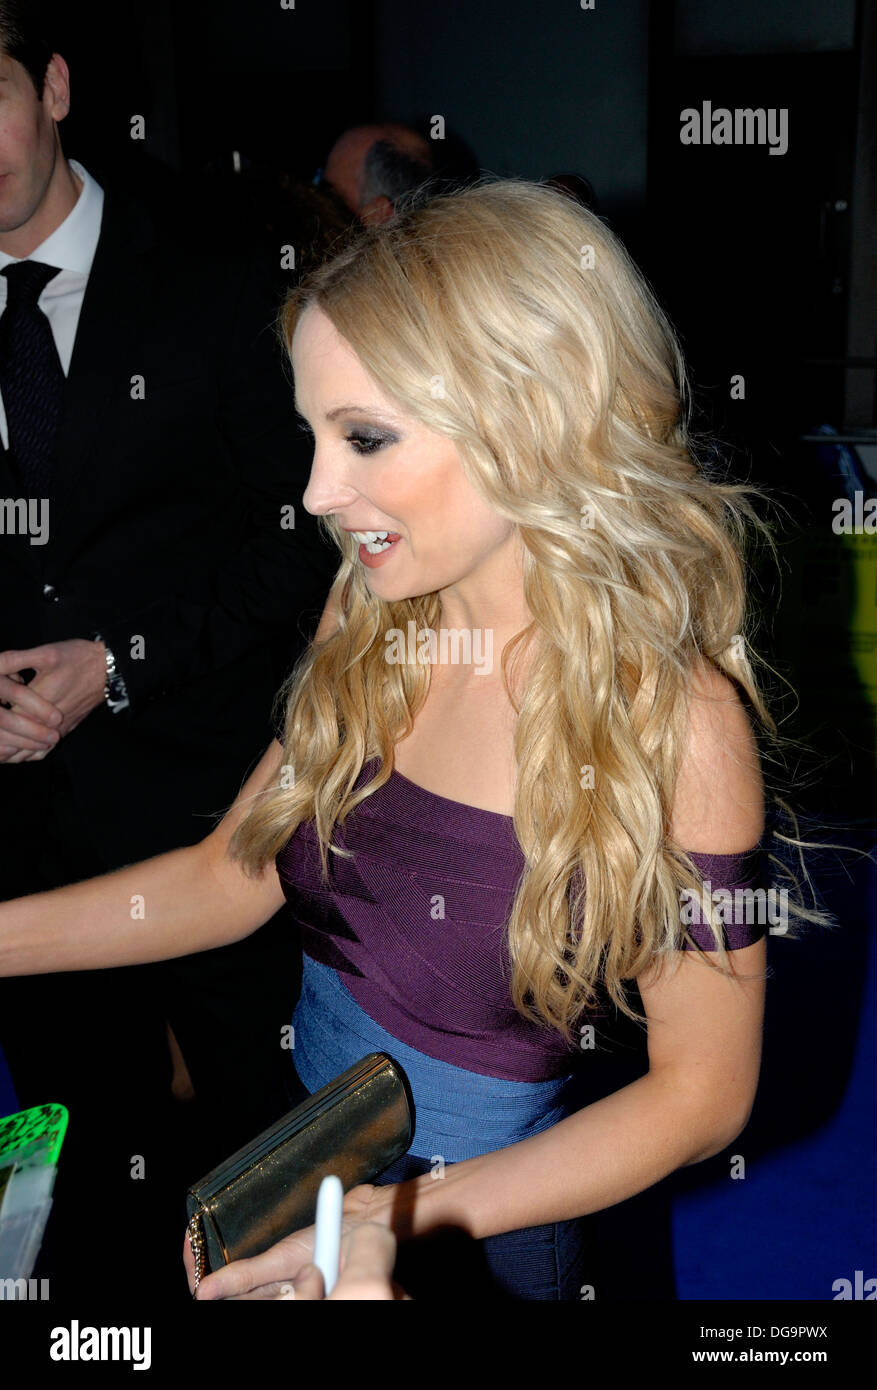 Joanne Froggatt signing autographs at the Film Premiere of 'Filth', London, 30th September 2013. Stock Photo